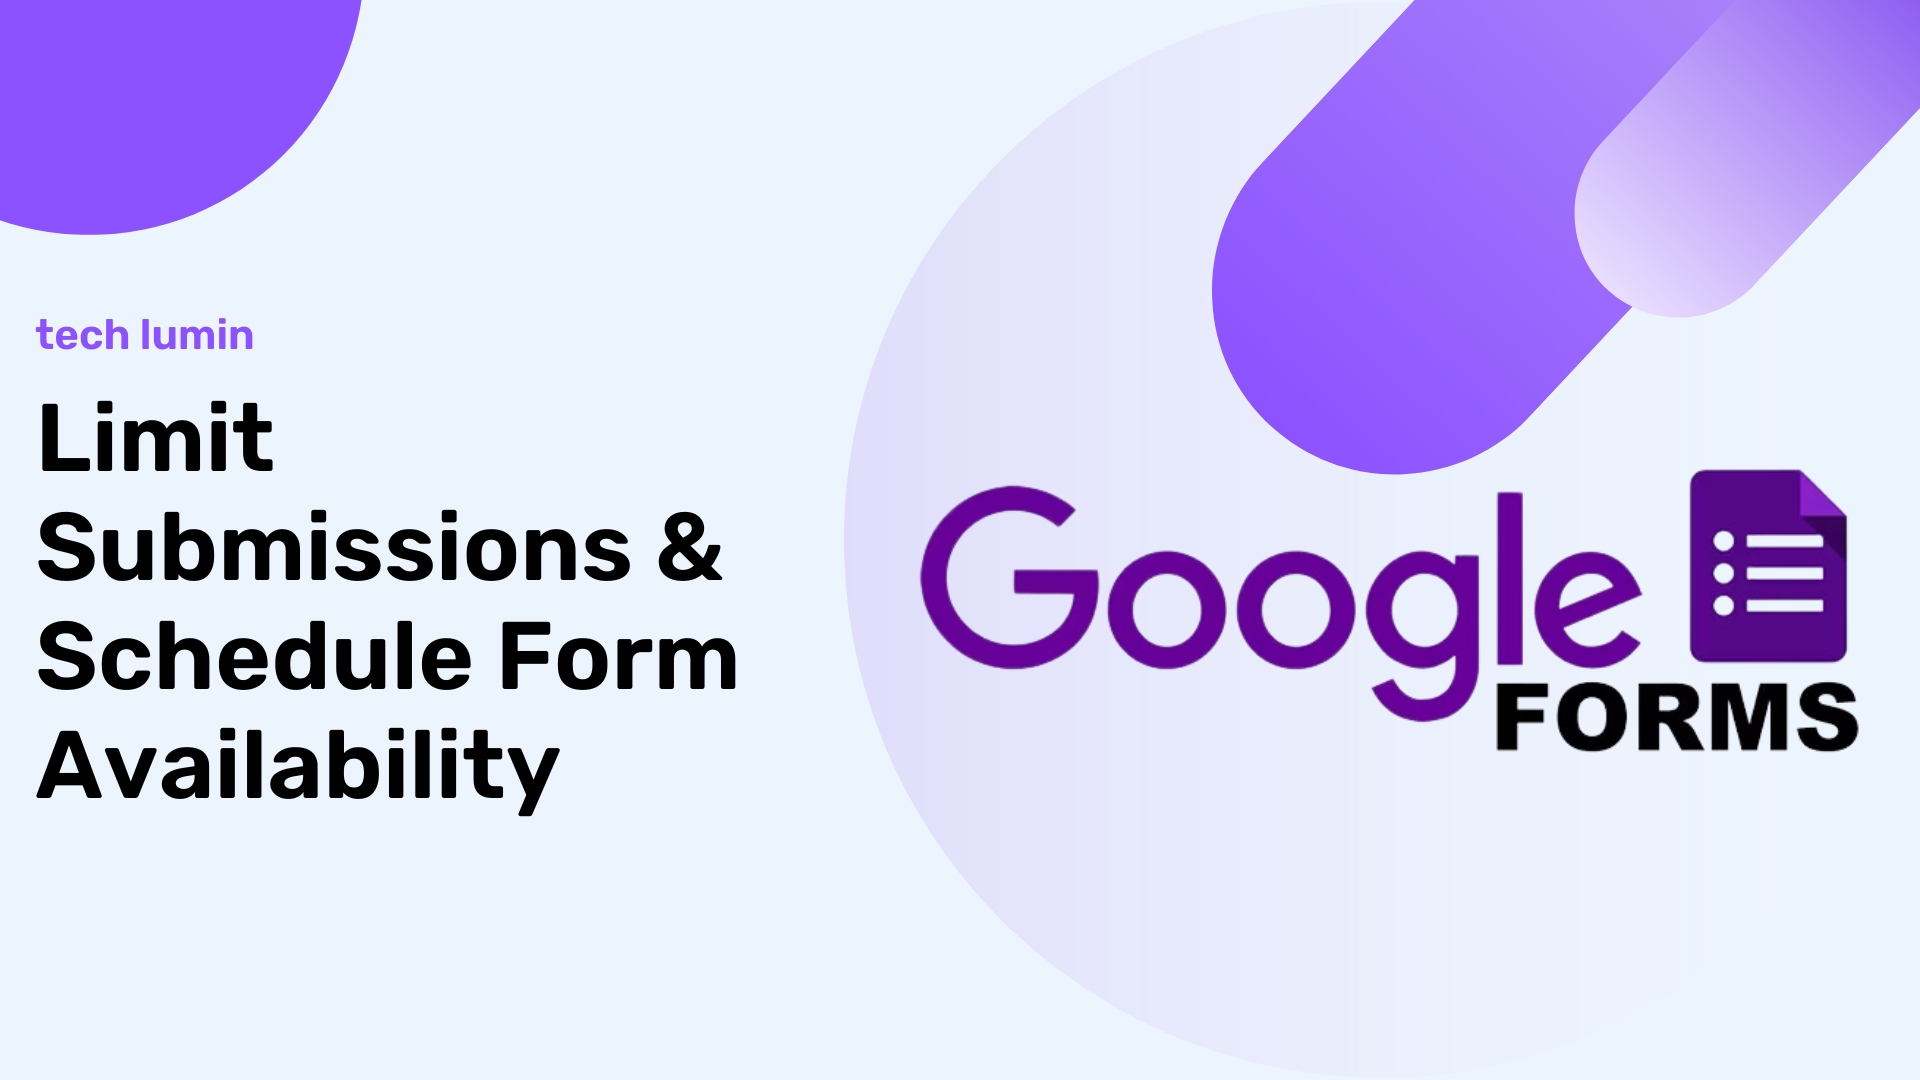 How to Limit Submissions and Schedule Form Availability in Google Forms